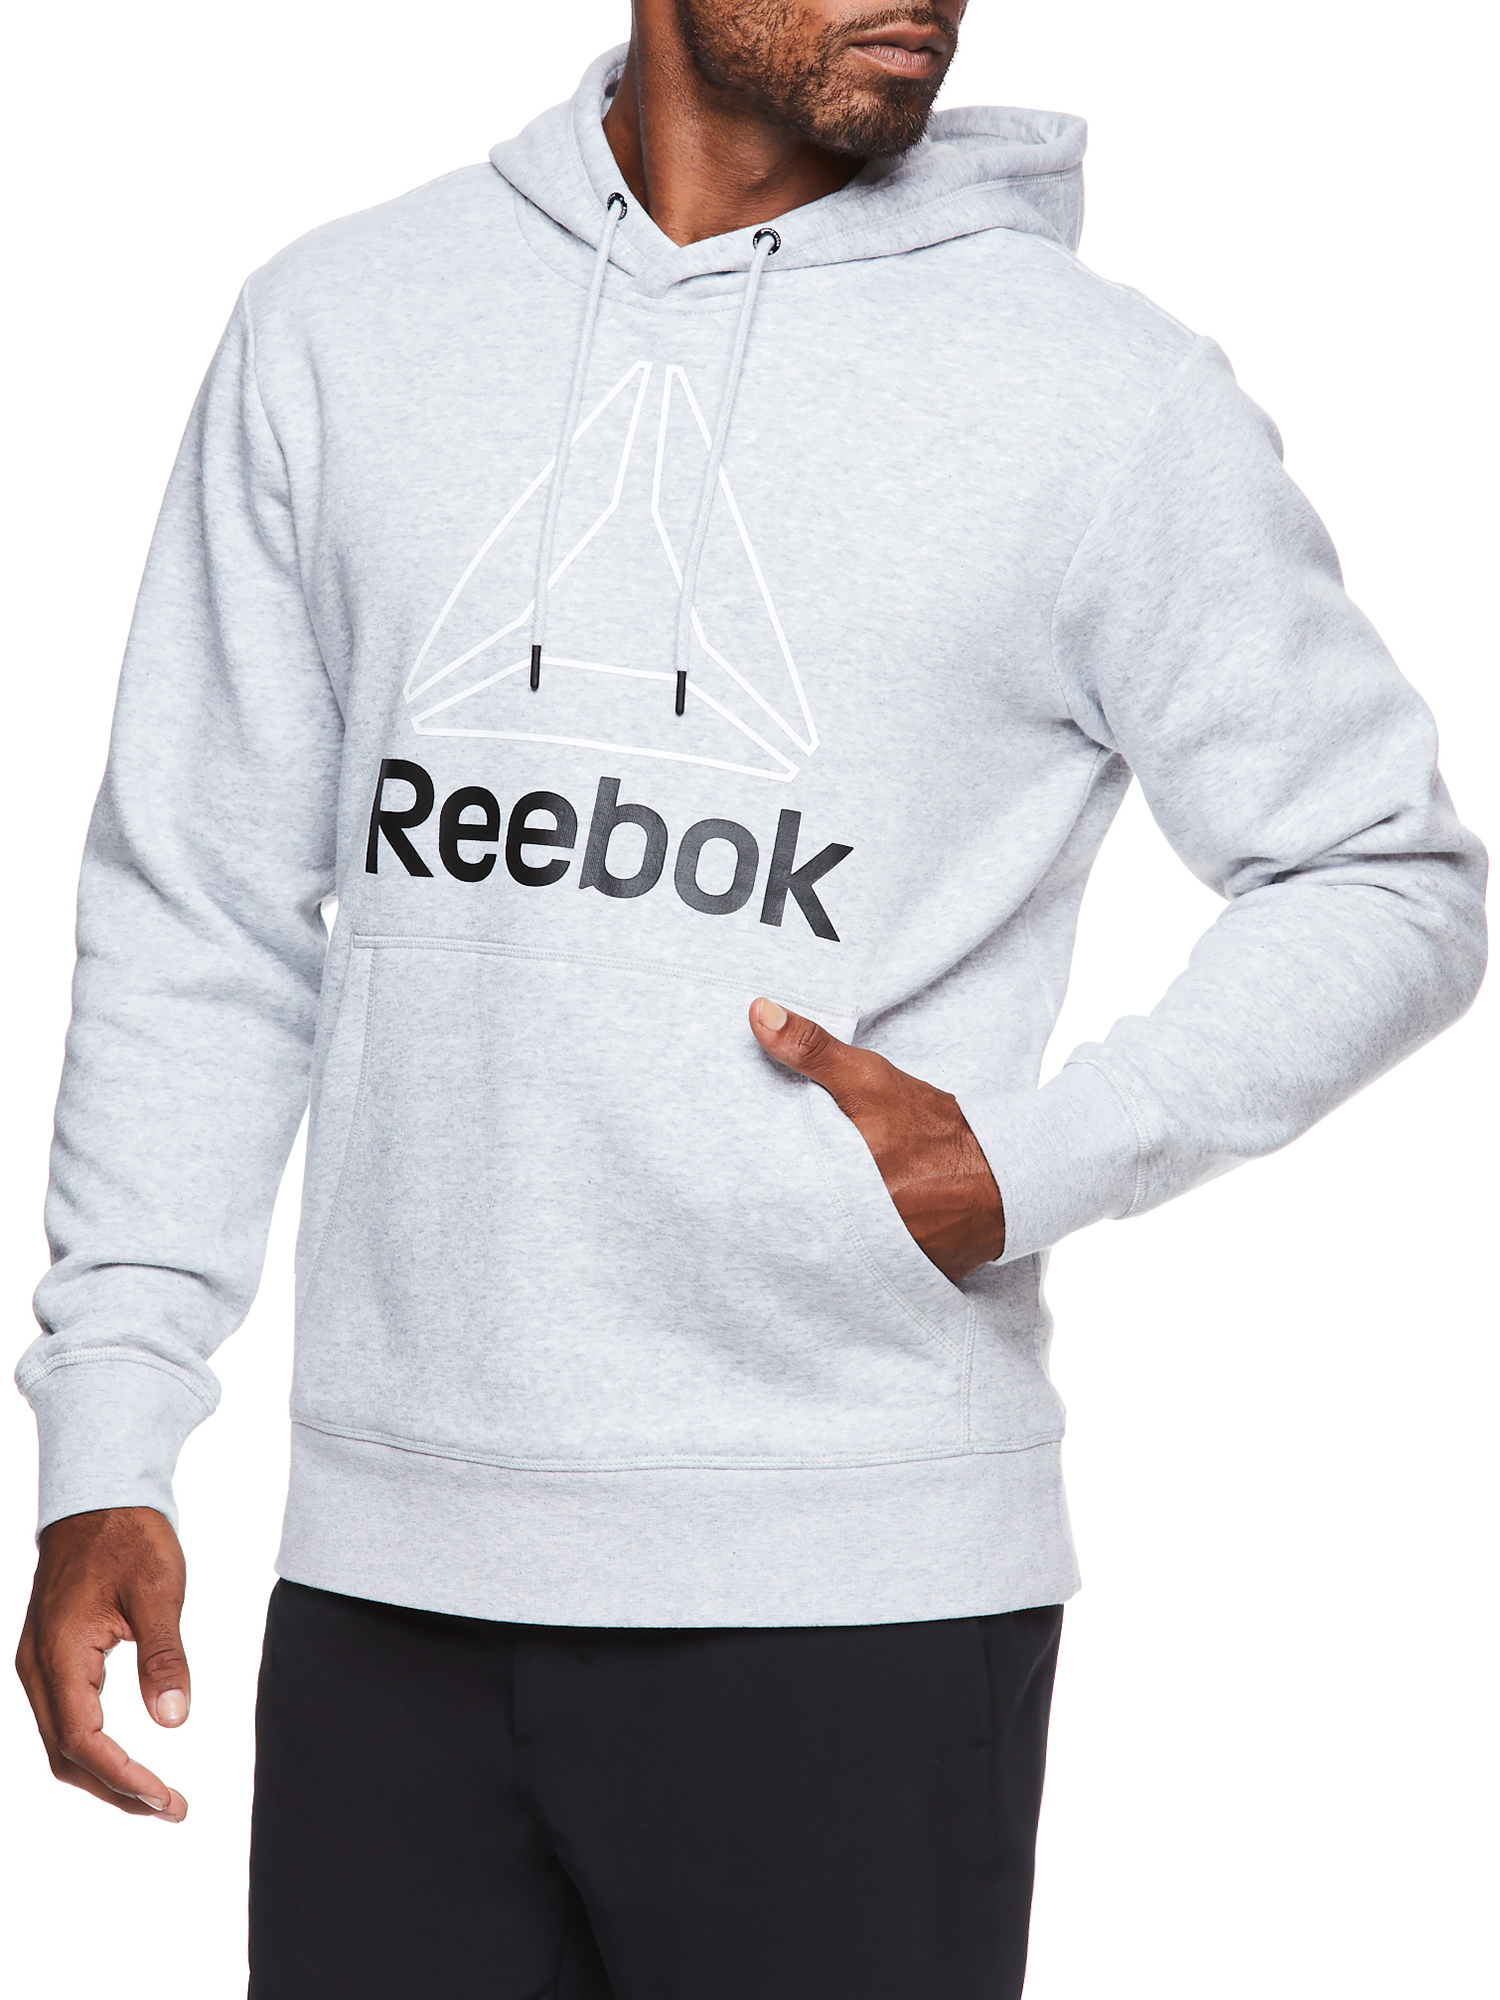 Reebok Mens and Big Mens Active Pullover Fleece Hoodie, Up to 3XL - image 3 of 5